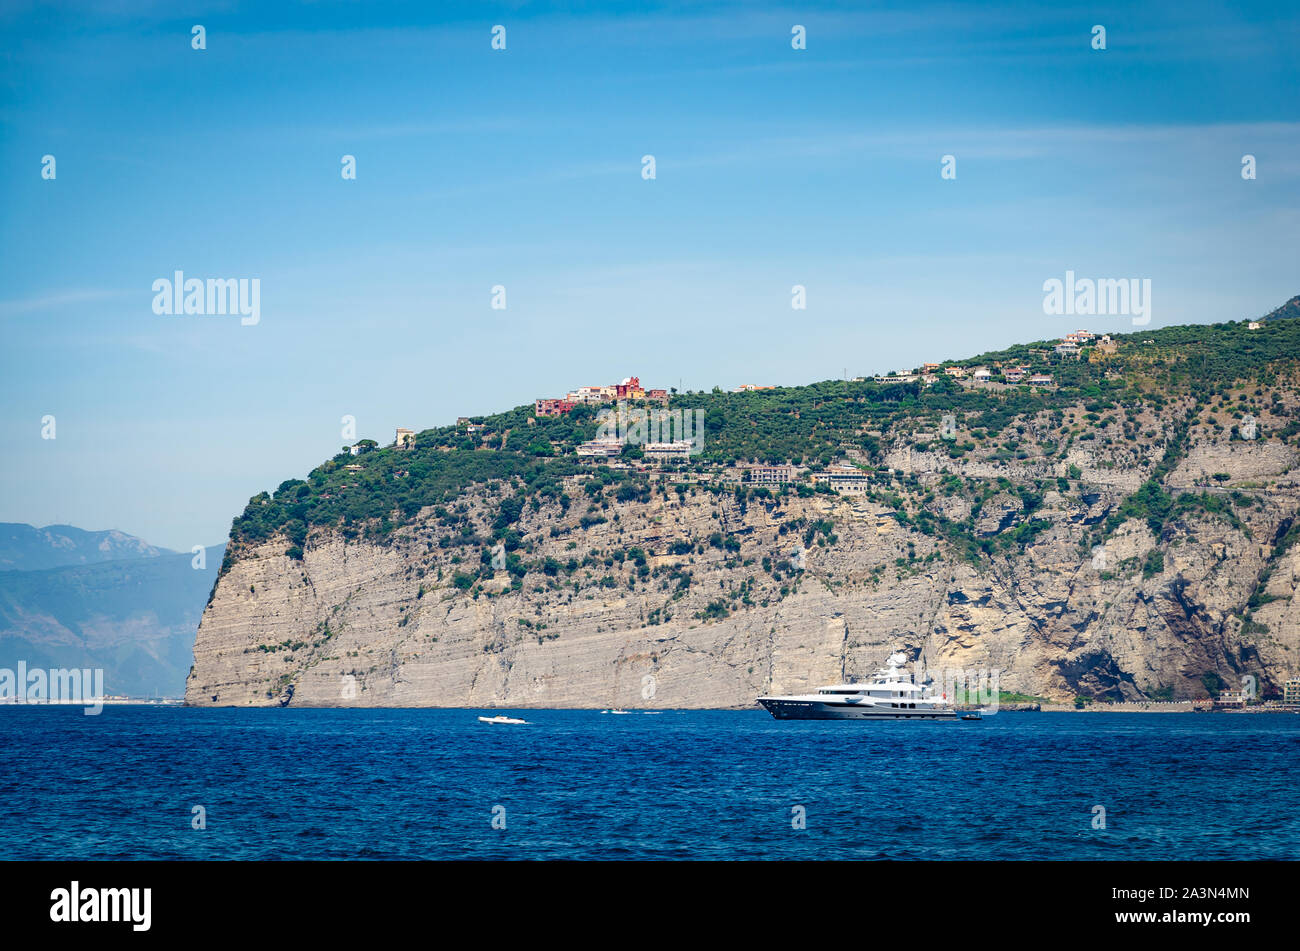 Scenic view of the harbor and cliffs of Sorrento on Amalfitan coast. Travel destinations concept. Stock Photo